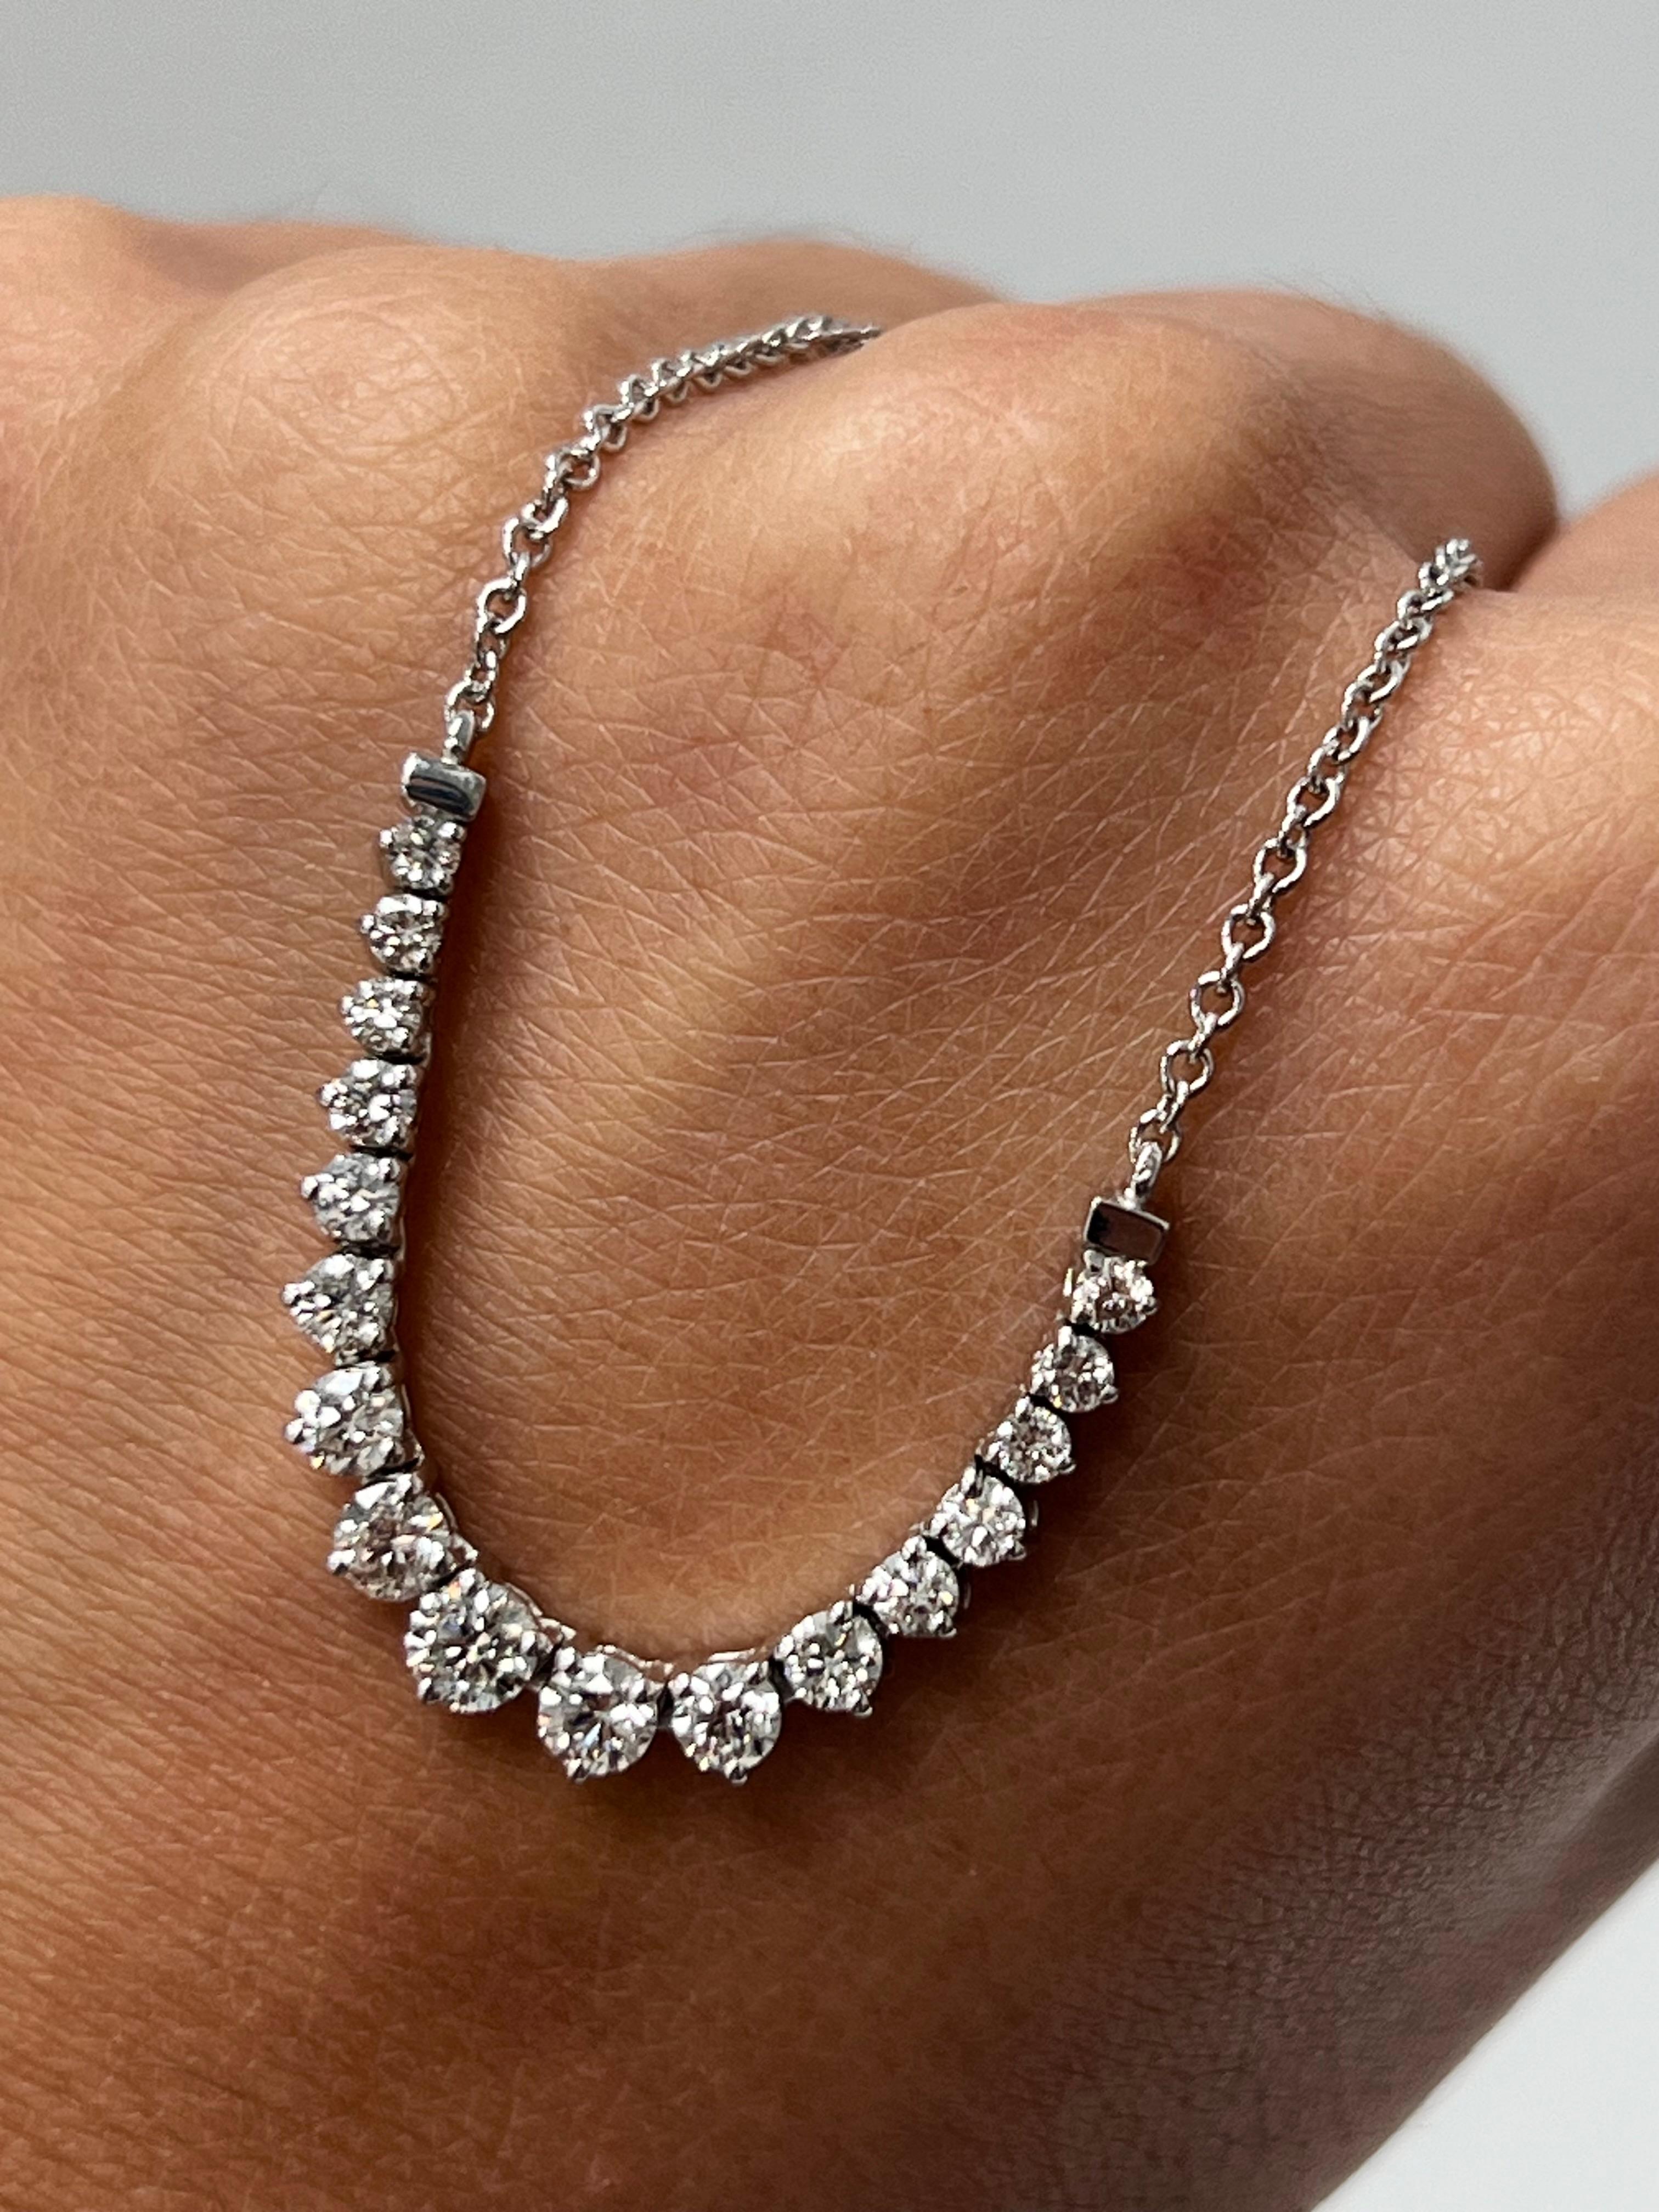 With this exquisite single-row white gold diamond necklace, style and glamour are in the spotlight. This 14-karat necklace is made from a total of 17 round diamonds totaling 2.0 carats, all in SI1-SI2, GH color. This classic look is timeless and is